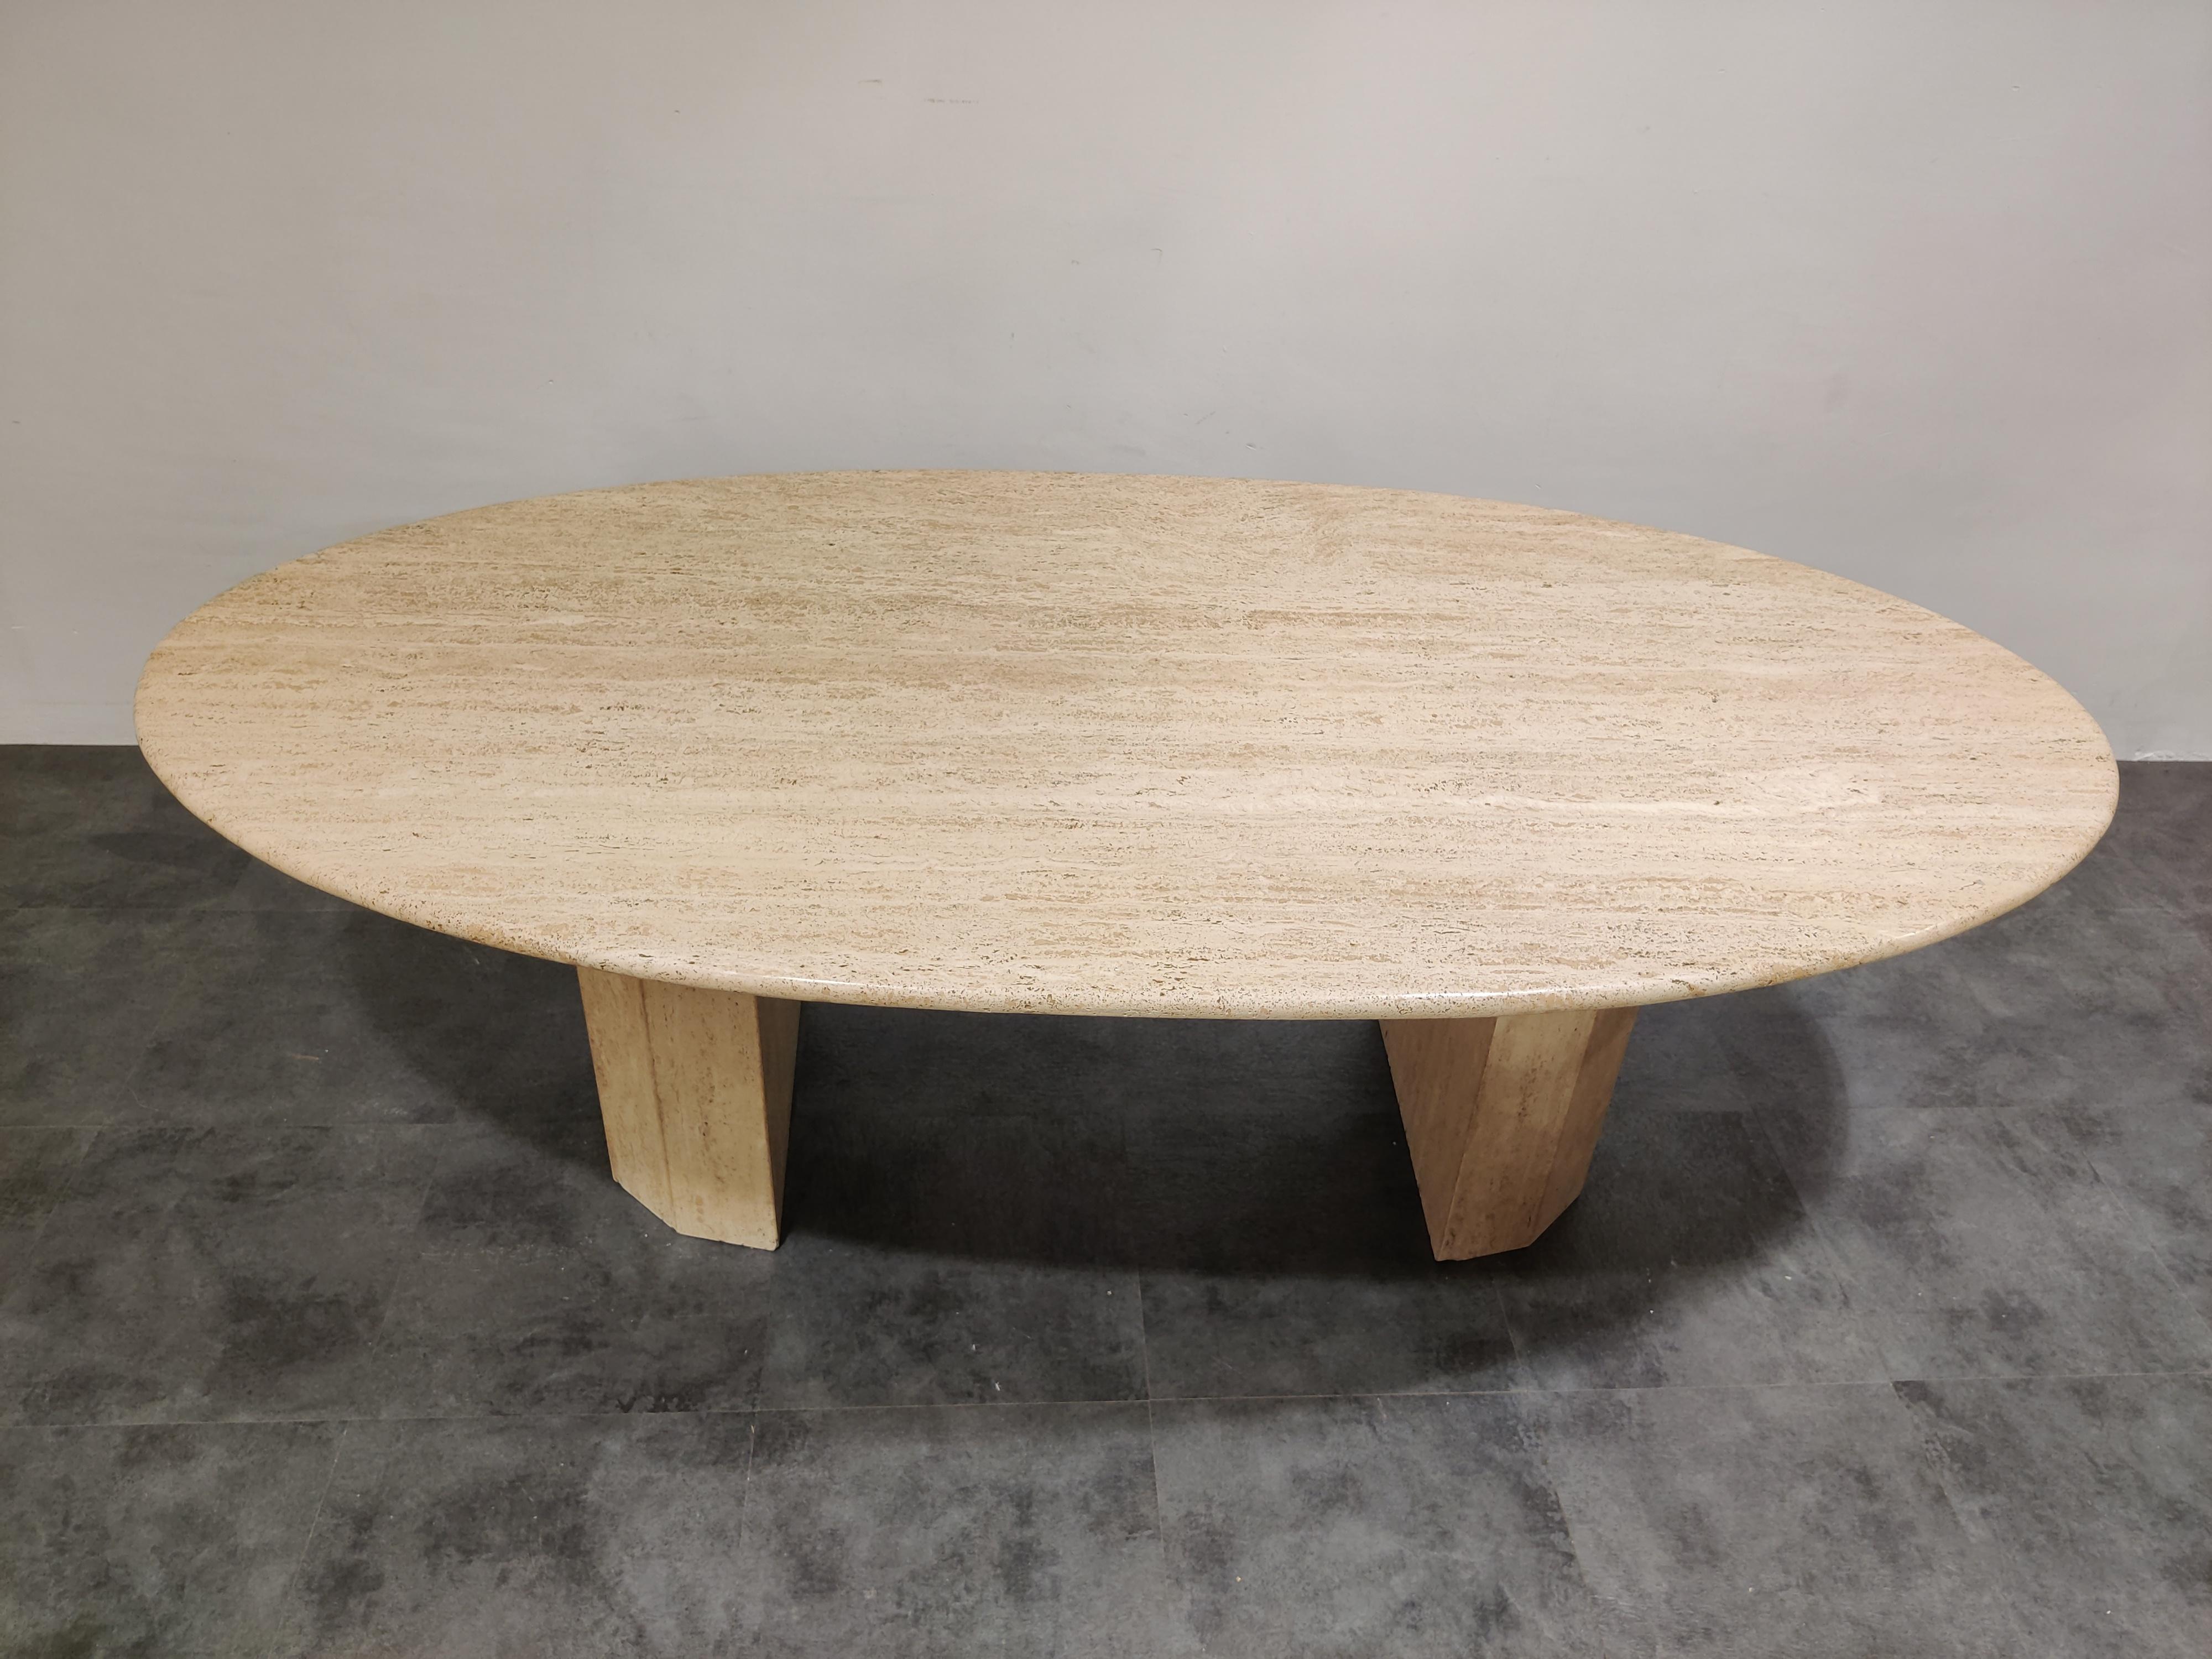 Elegant travertine dining table with pedestal bases.

Beautiful colored travertine with lovely pattern.

Timeless and very beautiful table which fits most interiors.

Good condition. 

Dimensions:
Height 73cm/28.74